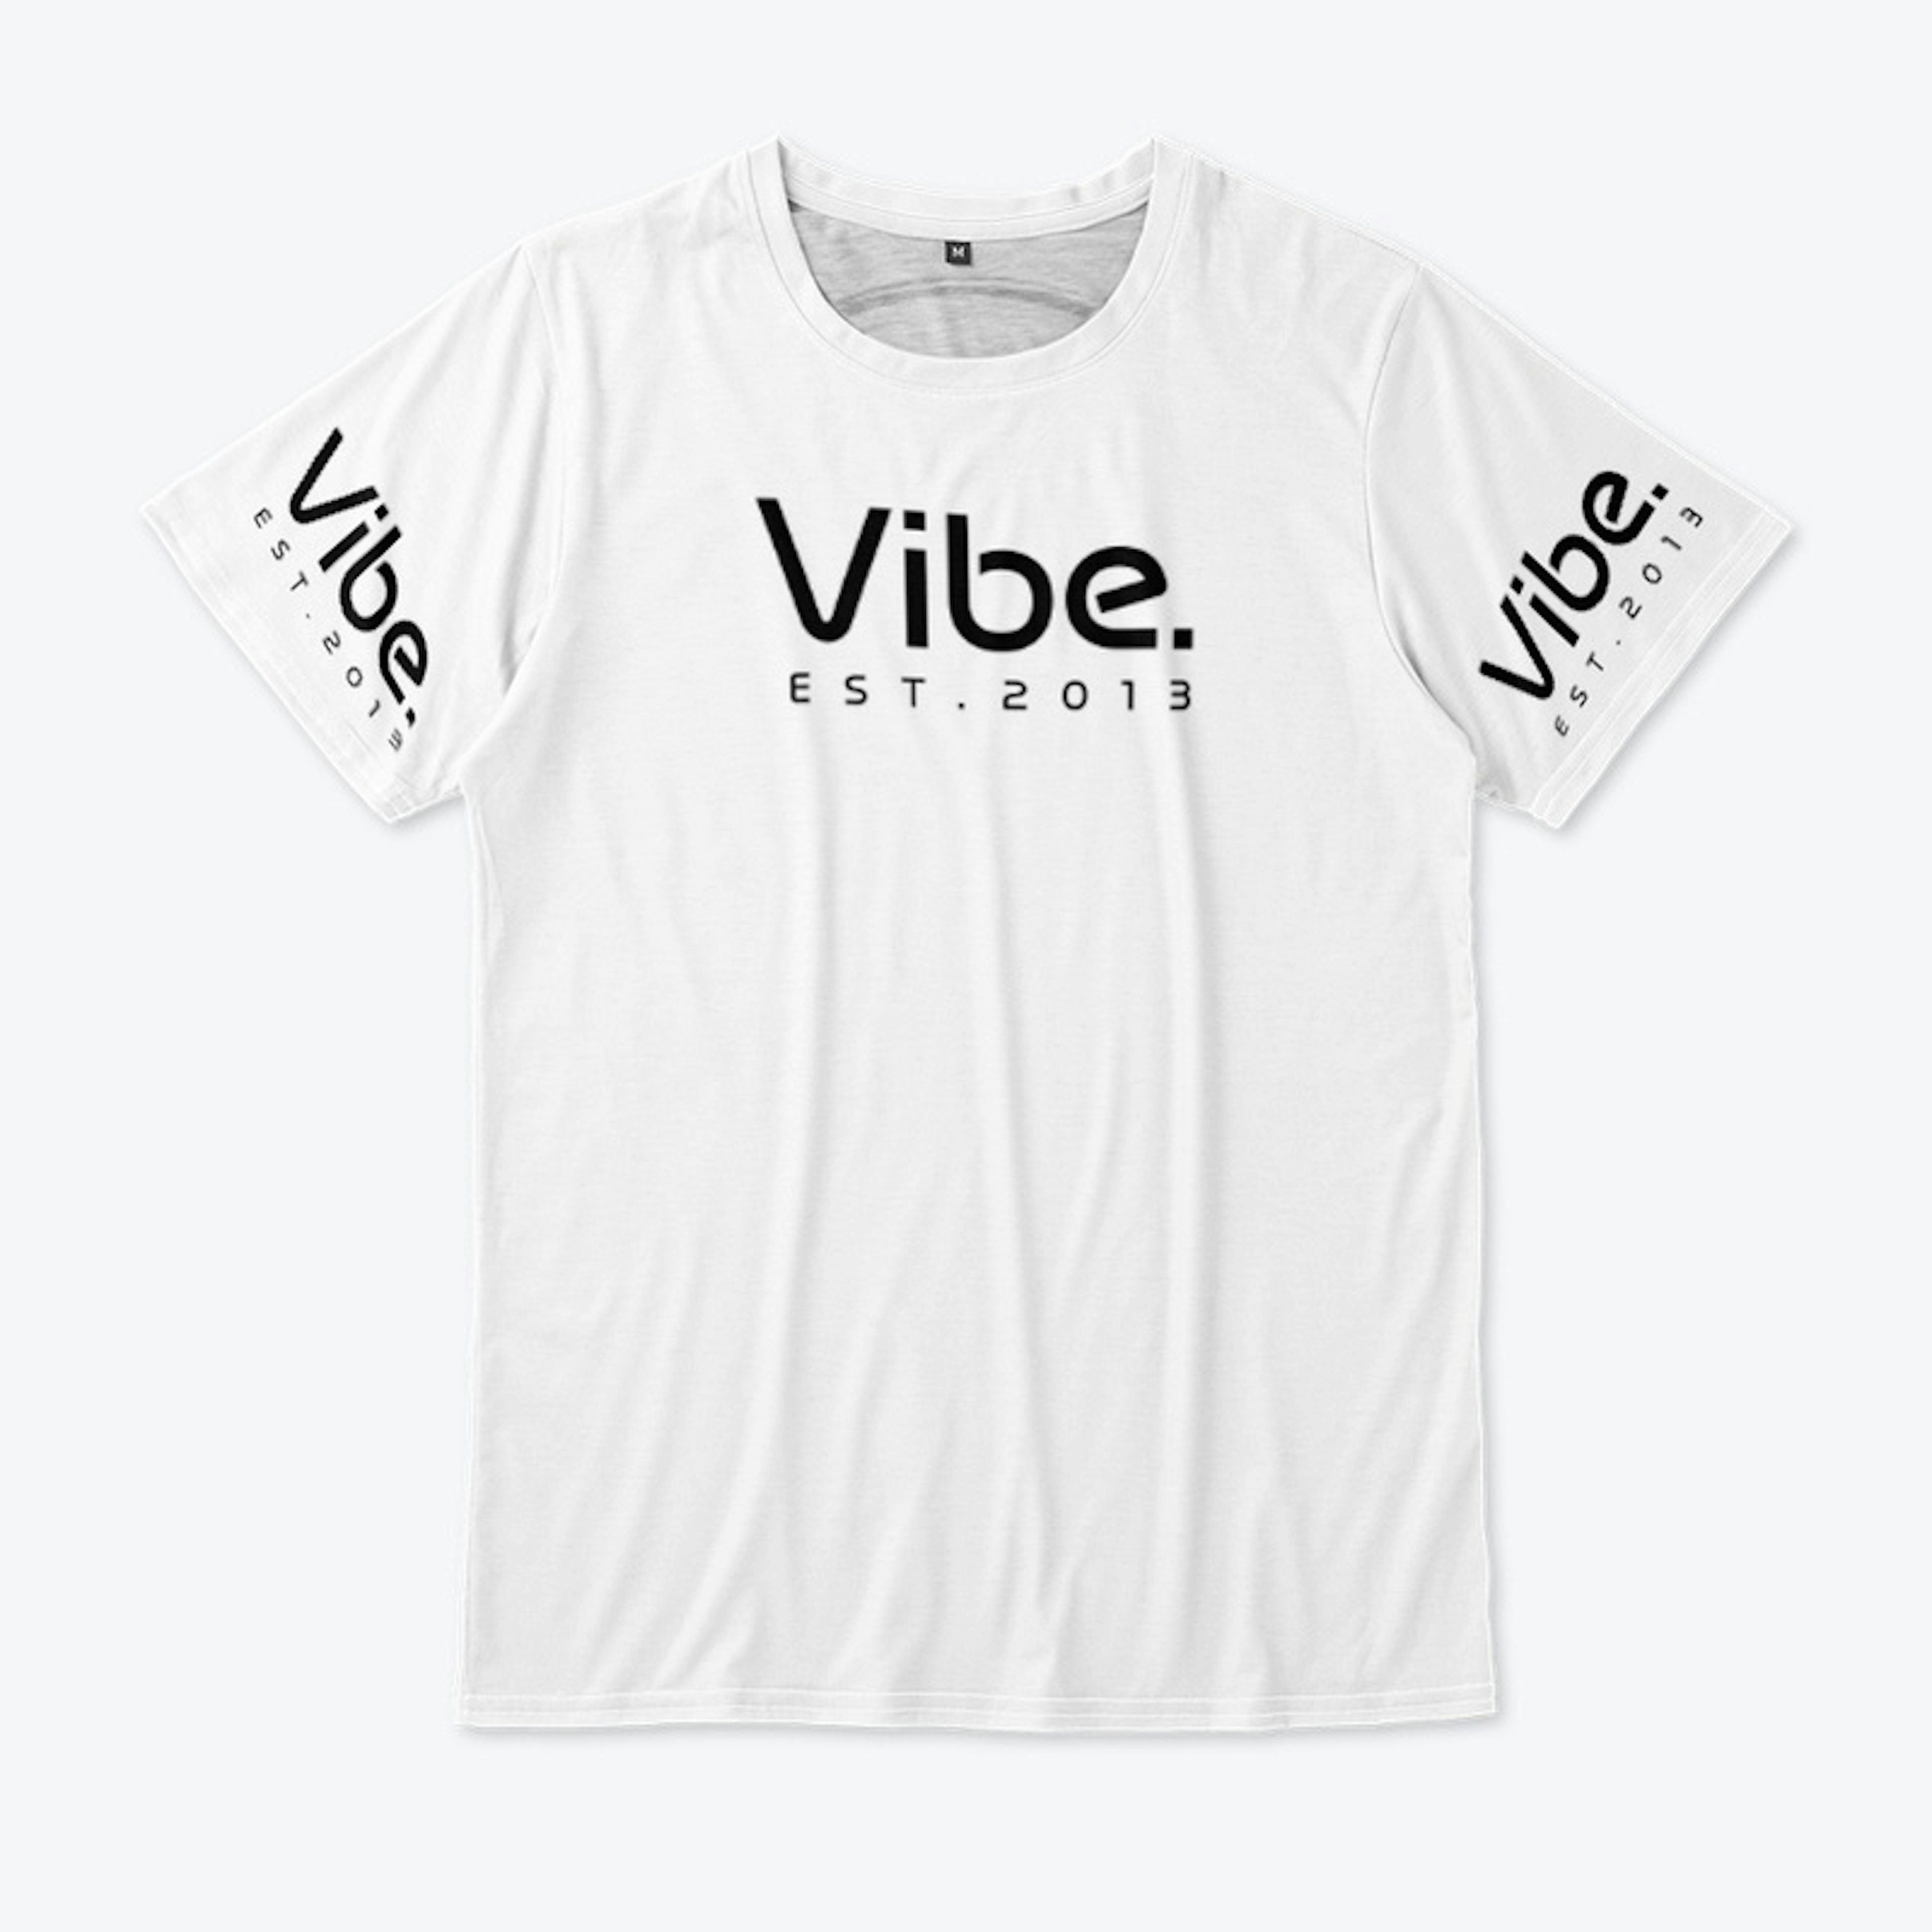 Vibe. Exclusive Products